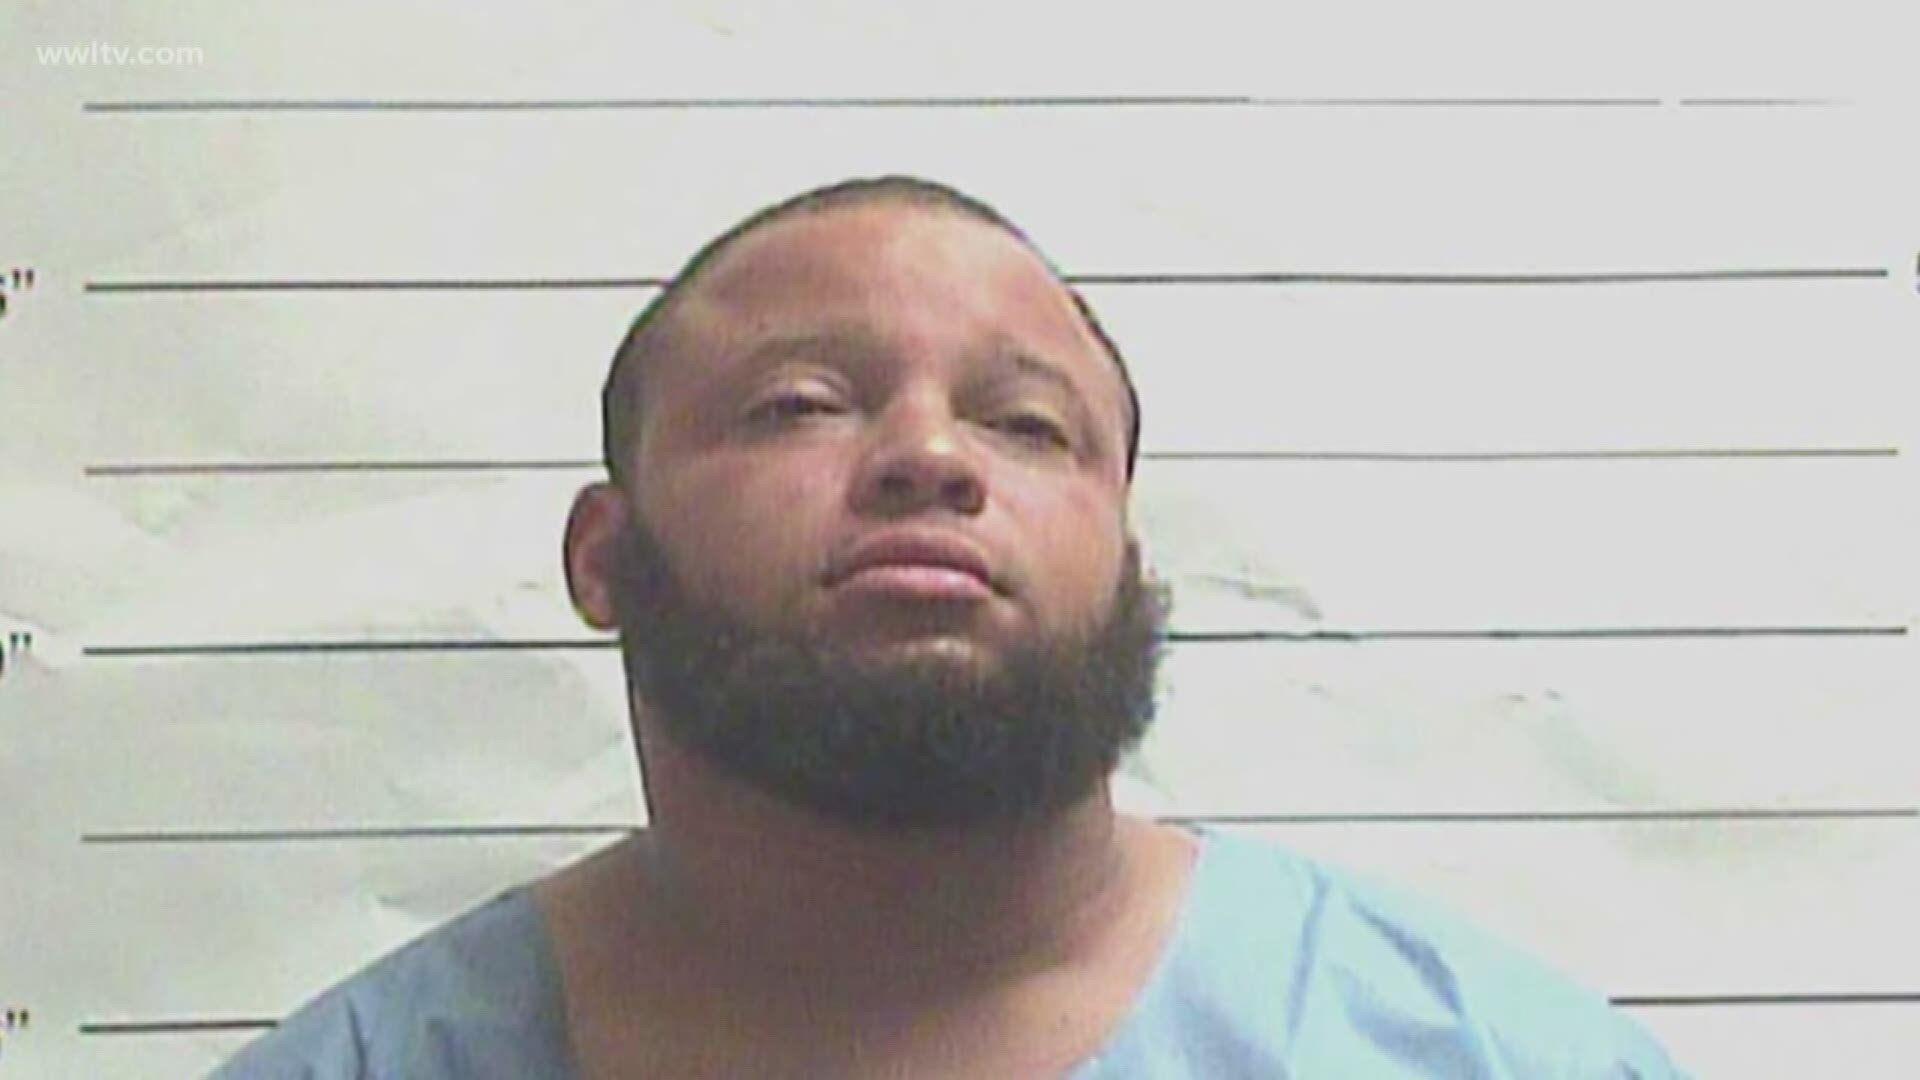 The man accused of drunk driving and killing two bike riders on Esplanade Avenue during Mardi Gras appeared in court for a discovery hearing Friday.